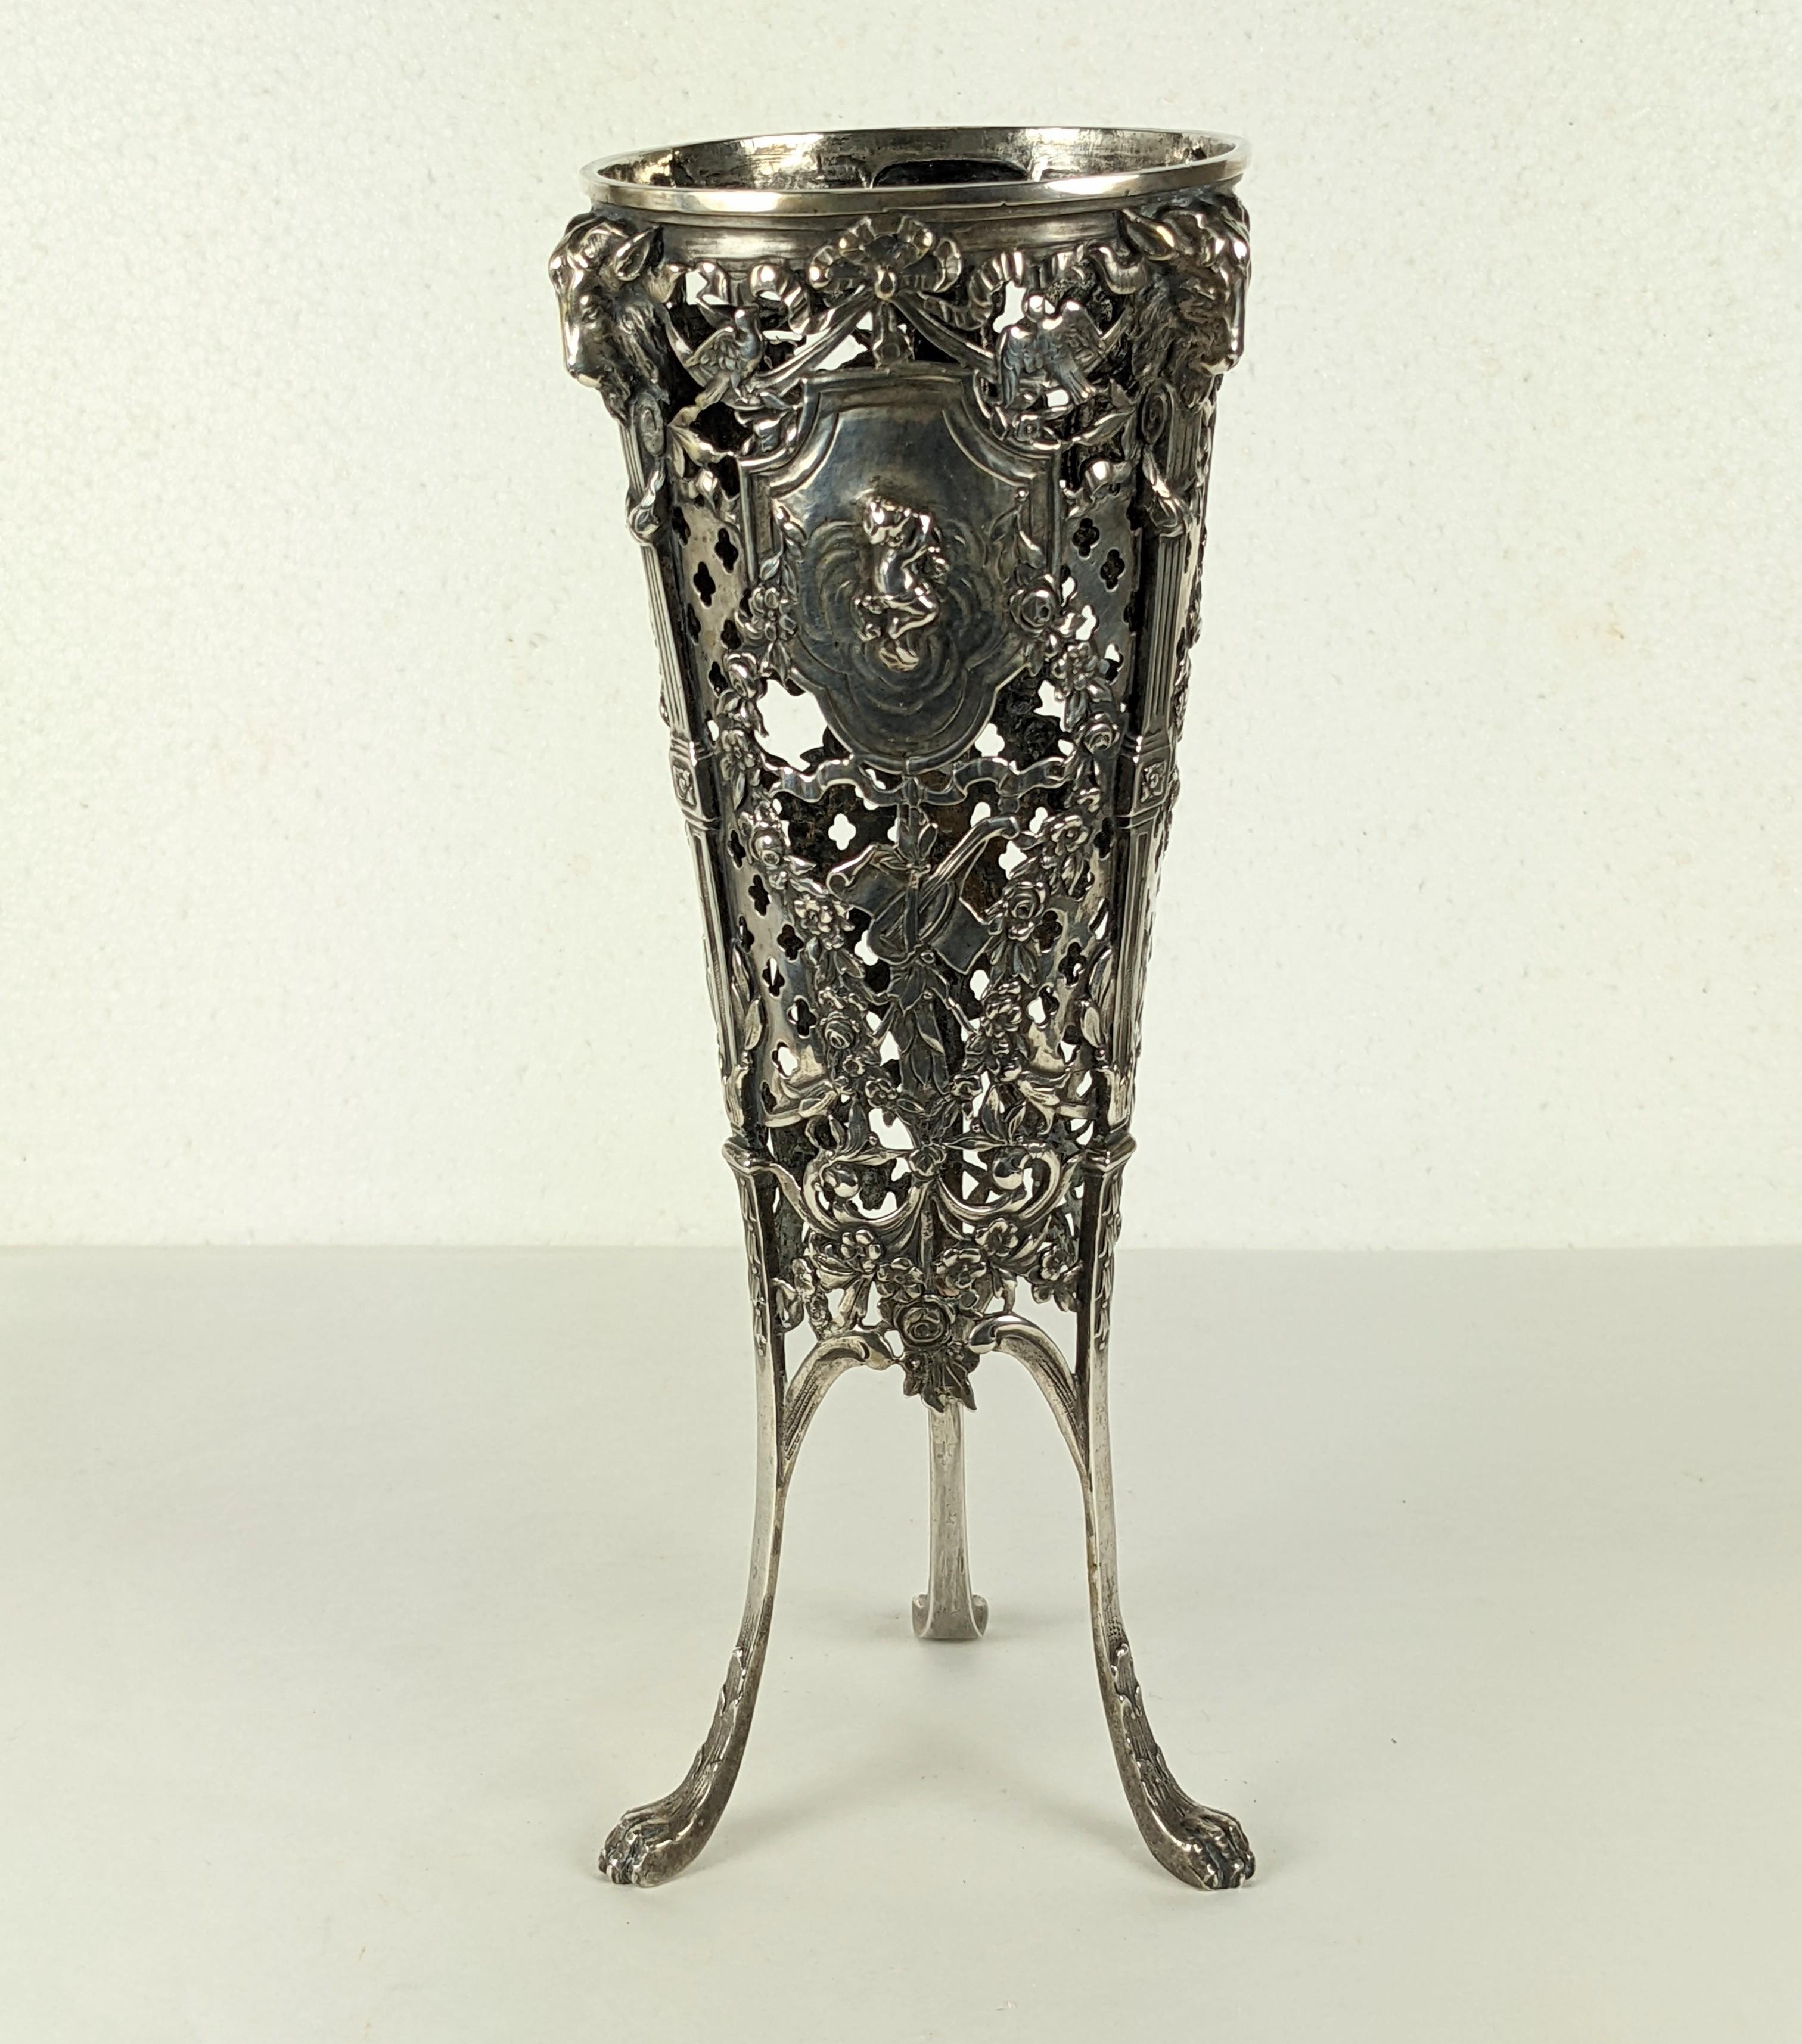 Late 19th century heavy gauge 800 silver vase base with repousse and open work motifs. Motifs include putti, rams heads, bird and swags. The glass liner would be tapered and is missing. Germany circa 1900. 
8.75